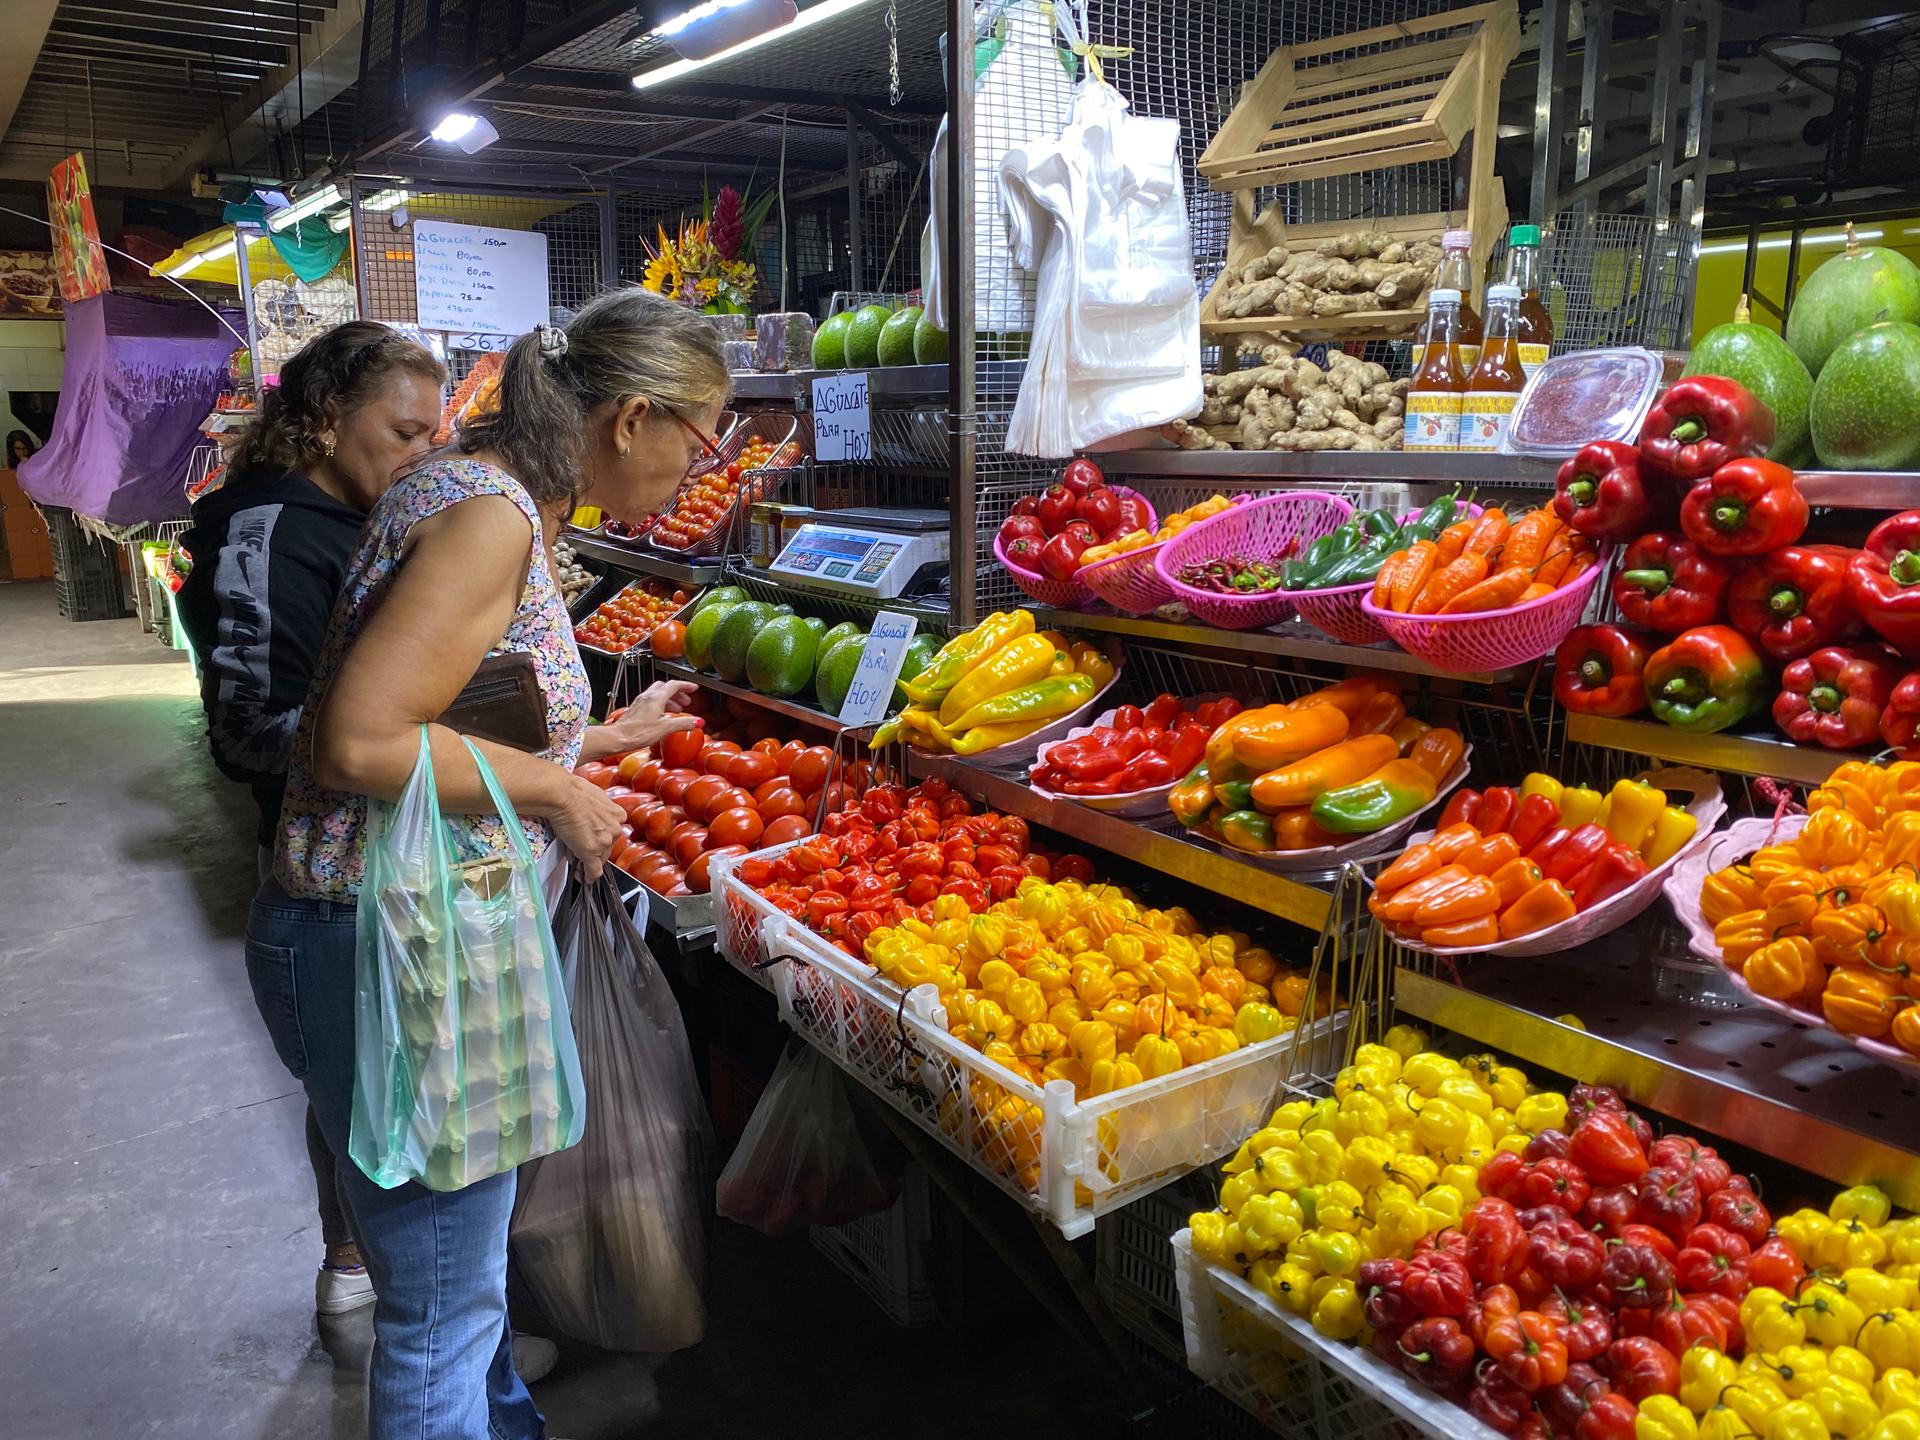 At a market in Caracas people buy vegetables and fruits that can be paid for in US dollars.